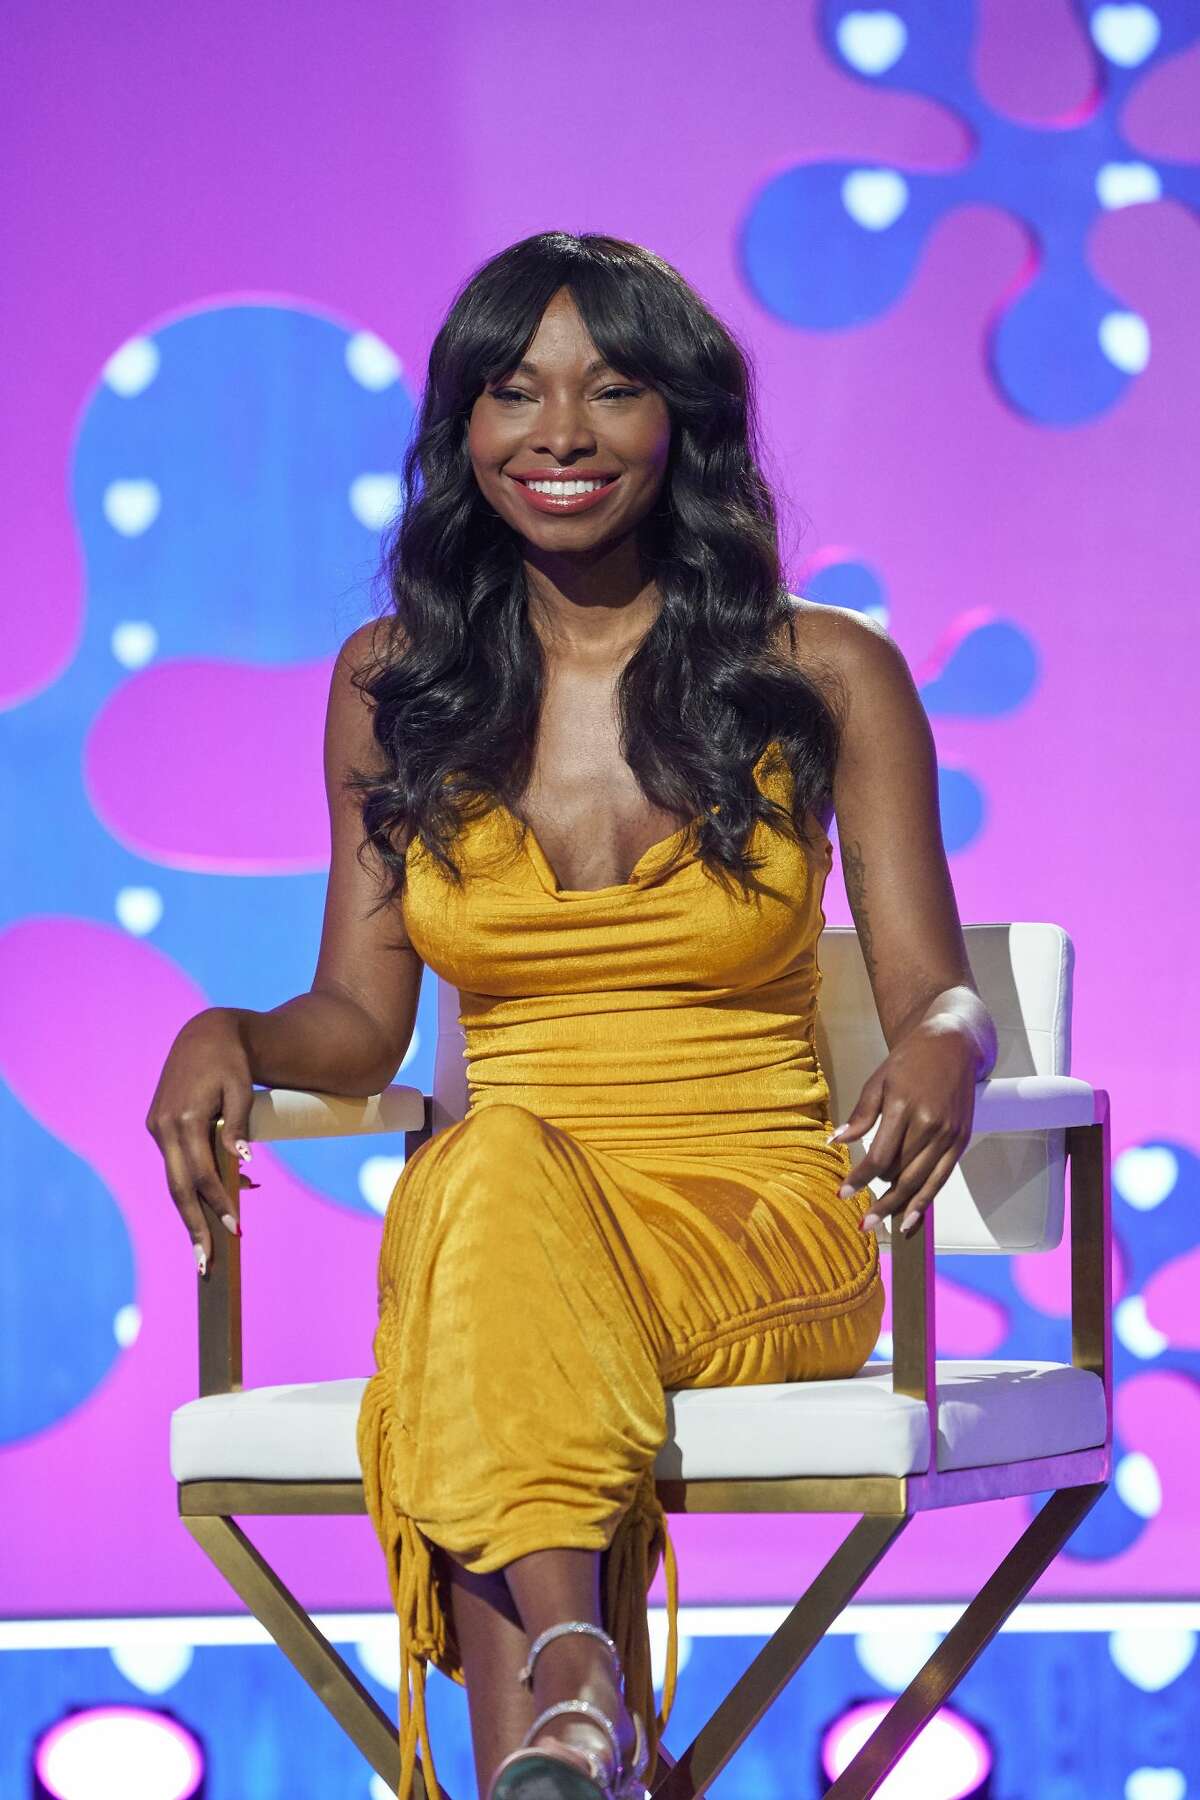 Parris Rose on "The Celebrity Dating Game."